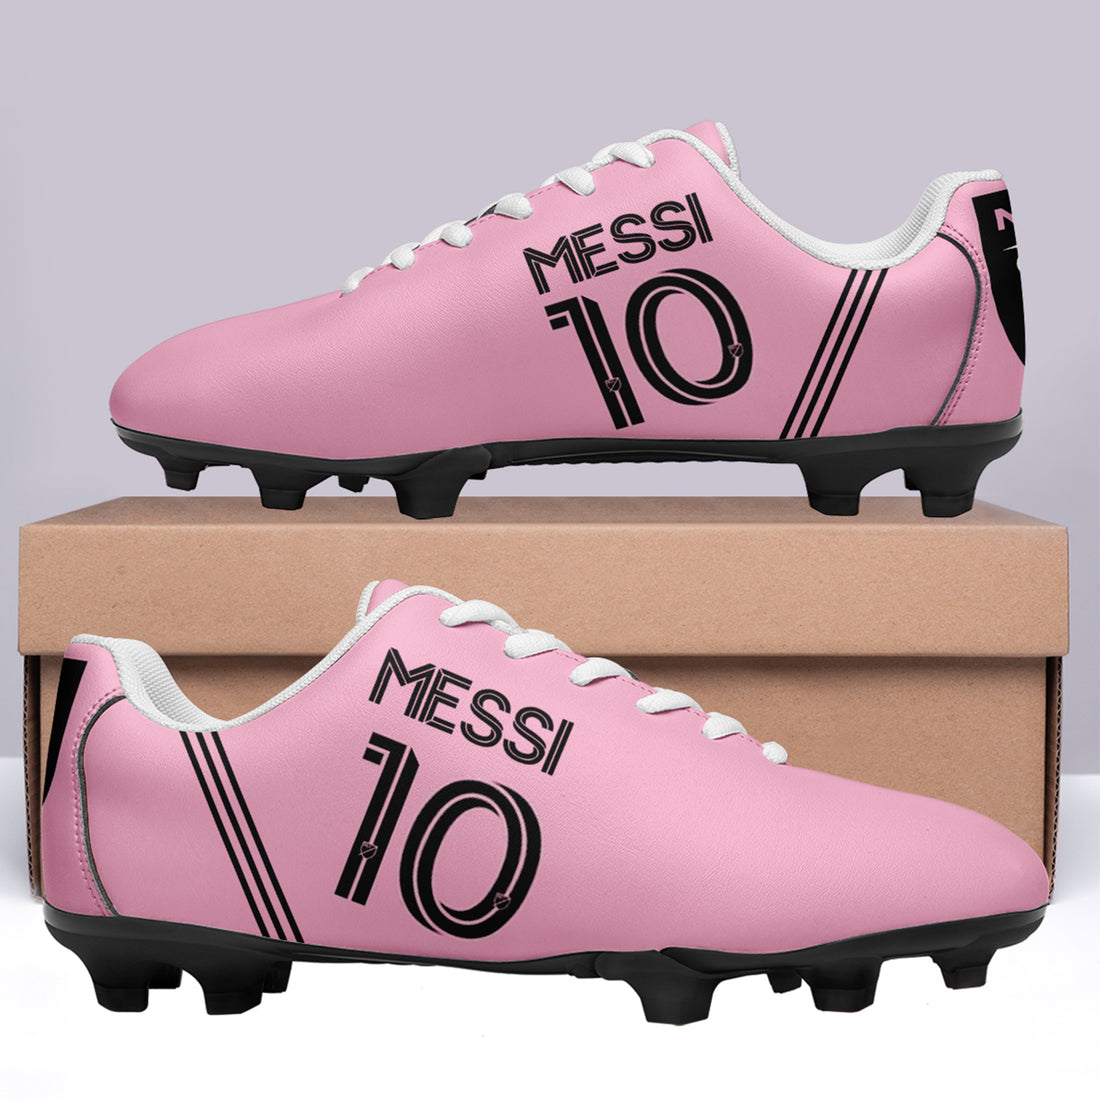 Personalised gift business ideas, Goody Gifts for Businesses Personalized Messi Miami Soccer Shoes, Customize National Team Soccer Shoes for Men and Women, SCL-23020067